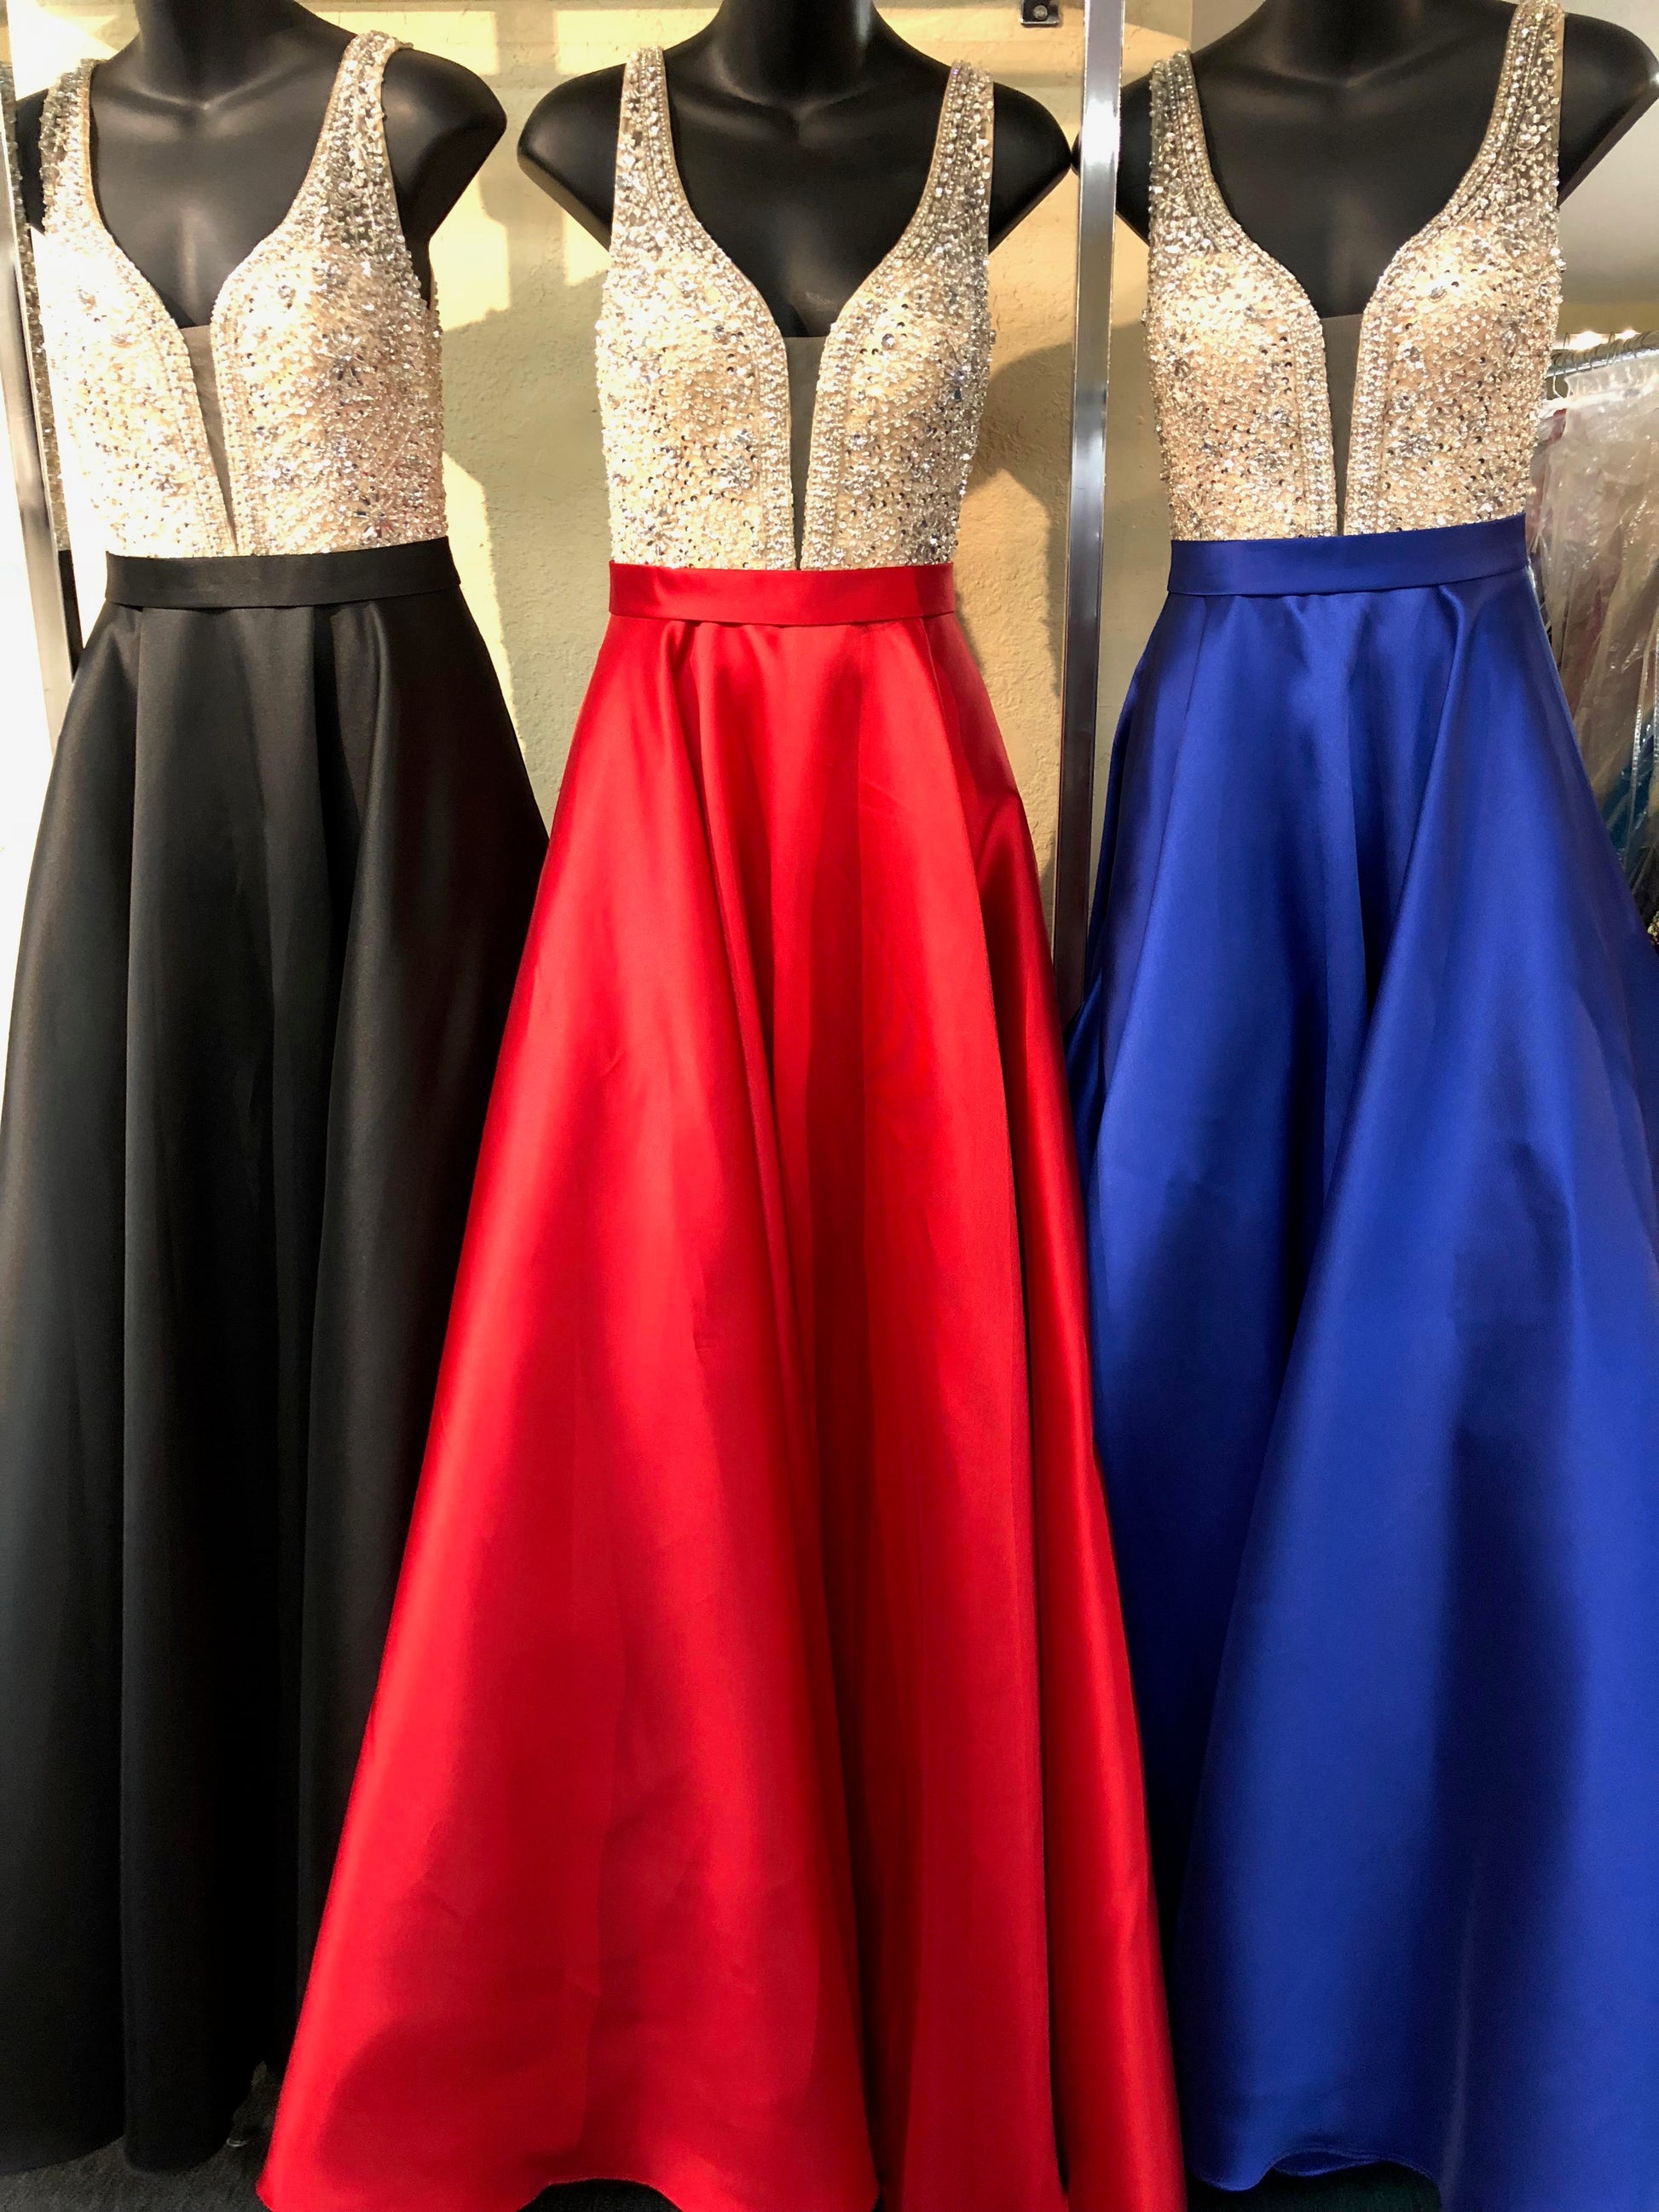 JVN60696 Primary colors Black, Royal Blue and Red  embellished plunging neckline mikado a line prom dress ball gown evening gown pageant dress 